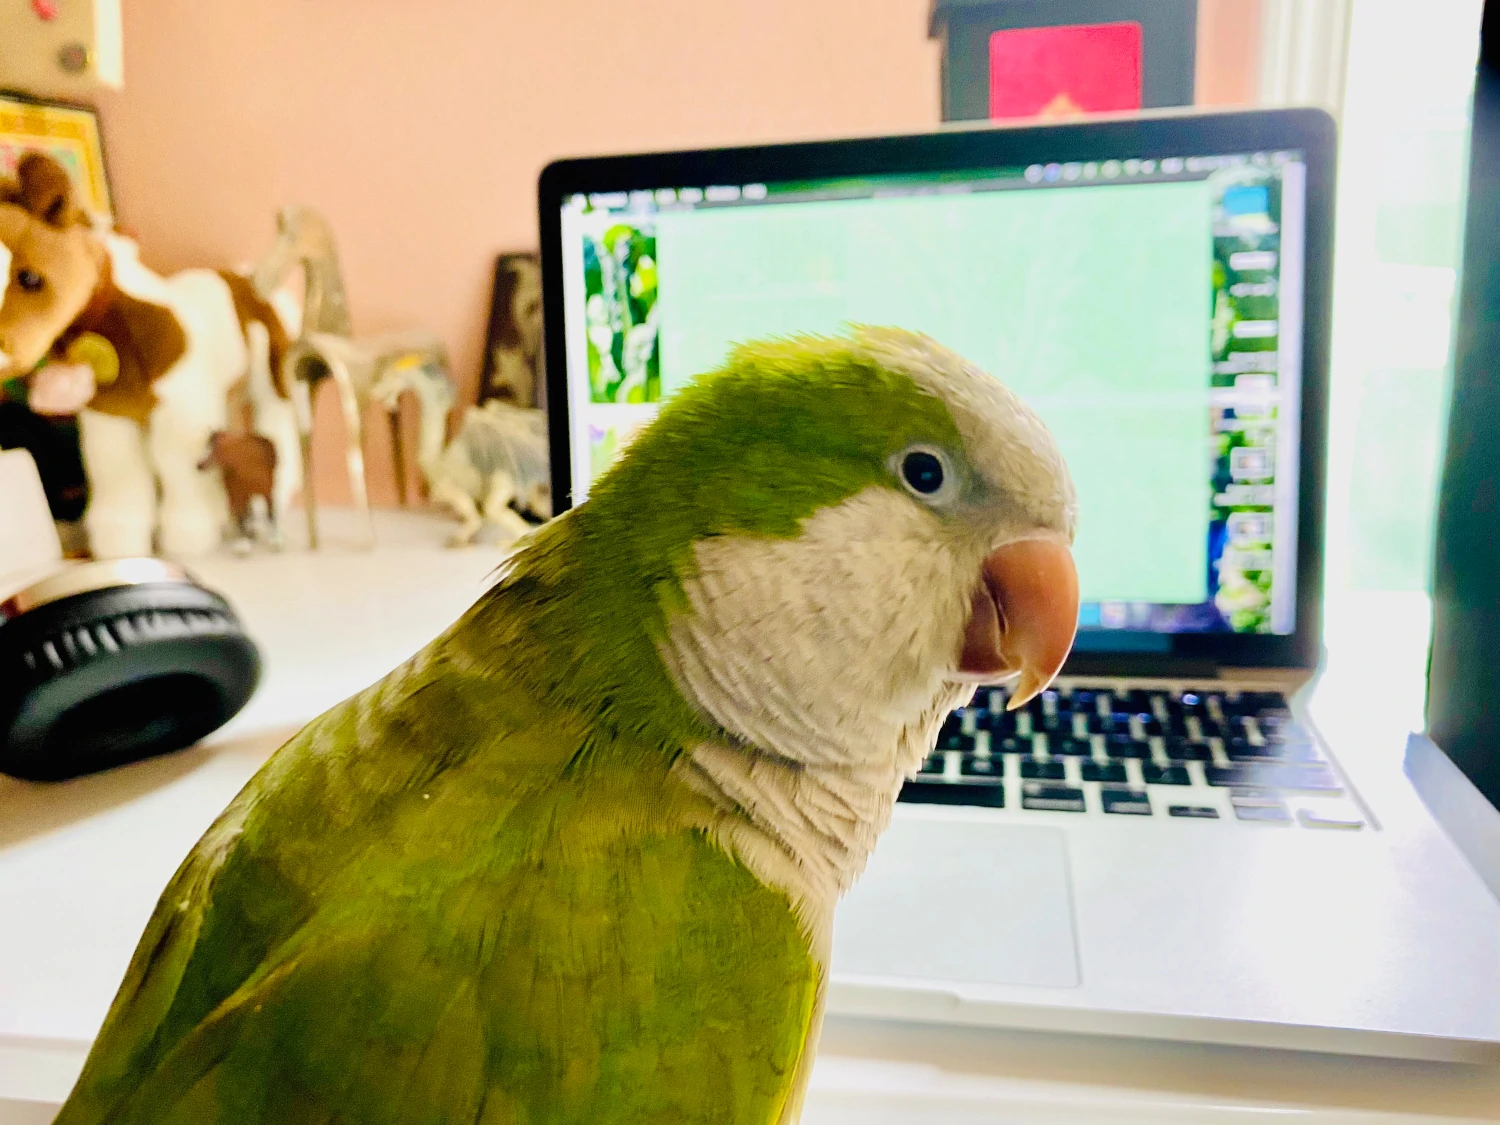 Mango the parrot at a computer